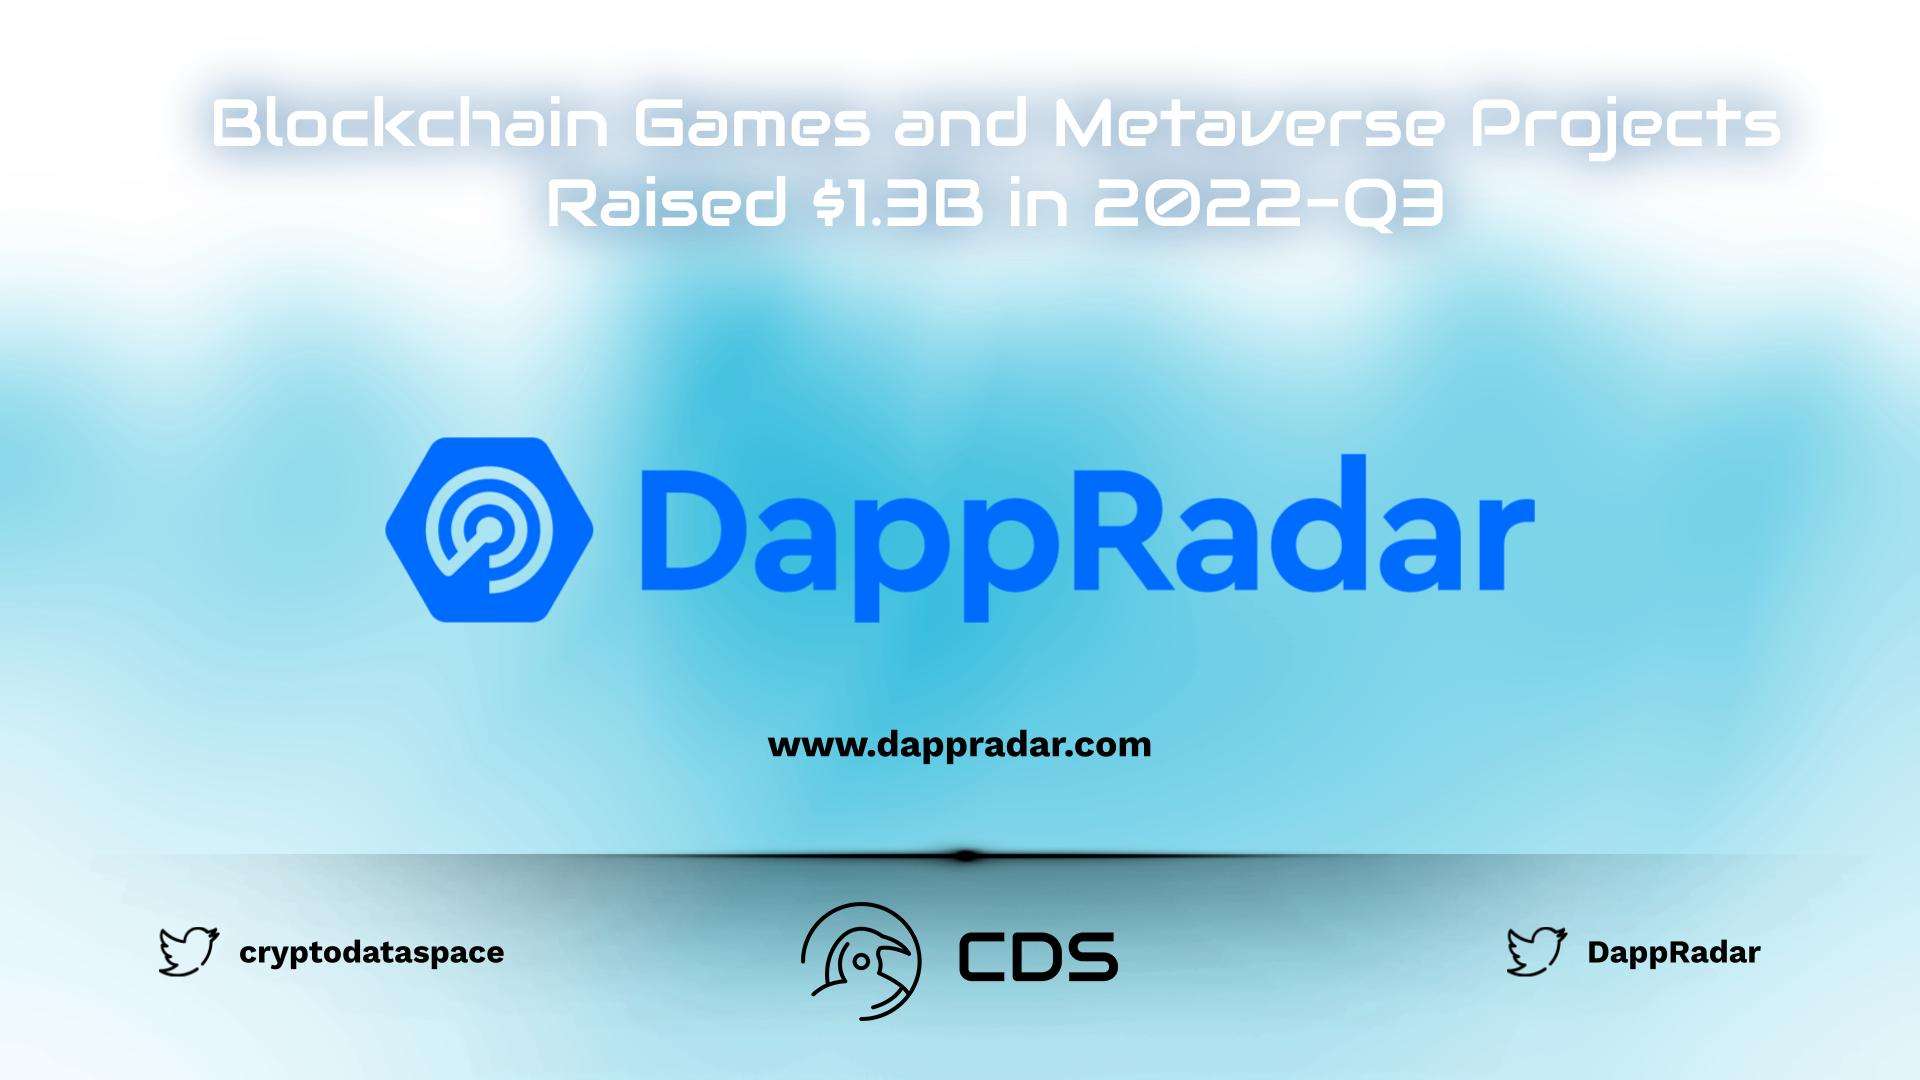 Blockchain Games and Metaverse Projects Raised $1.3B in 2022-Q3